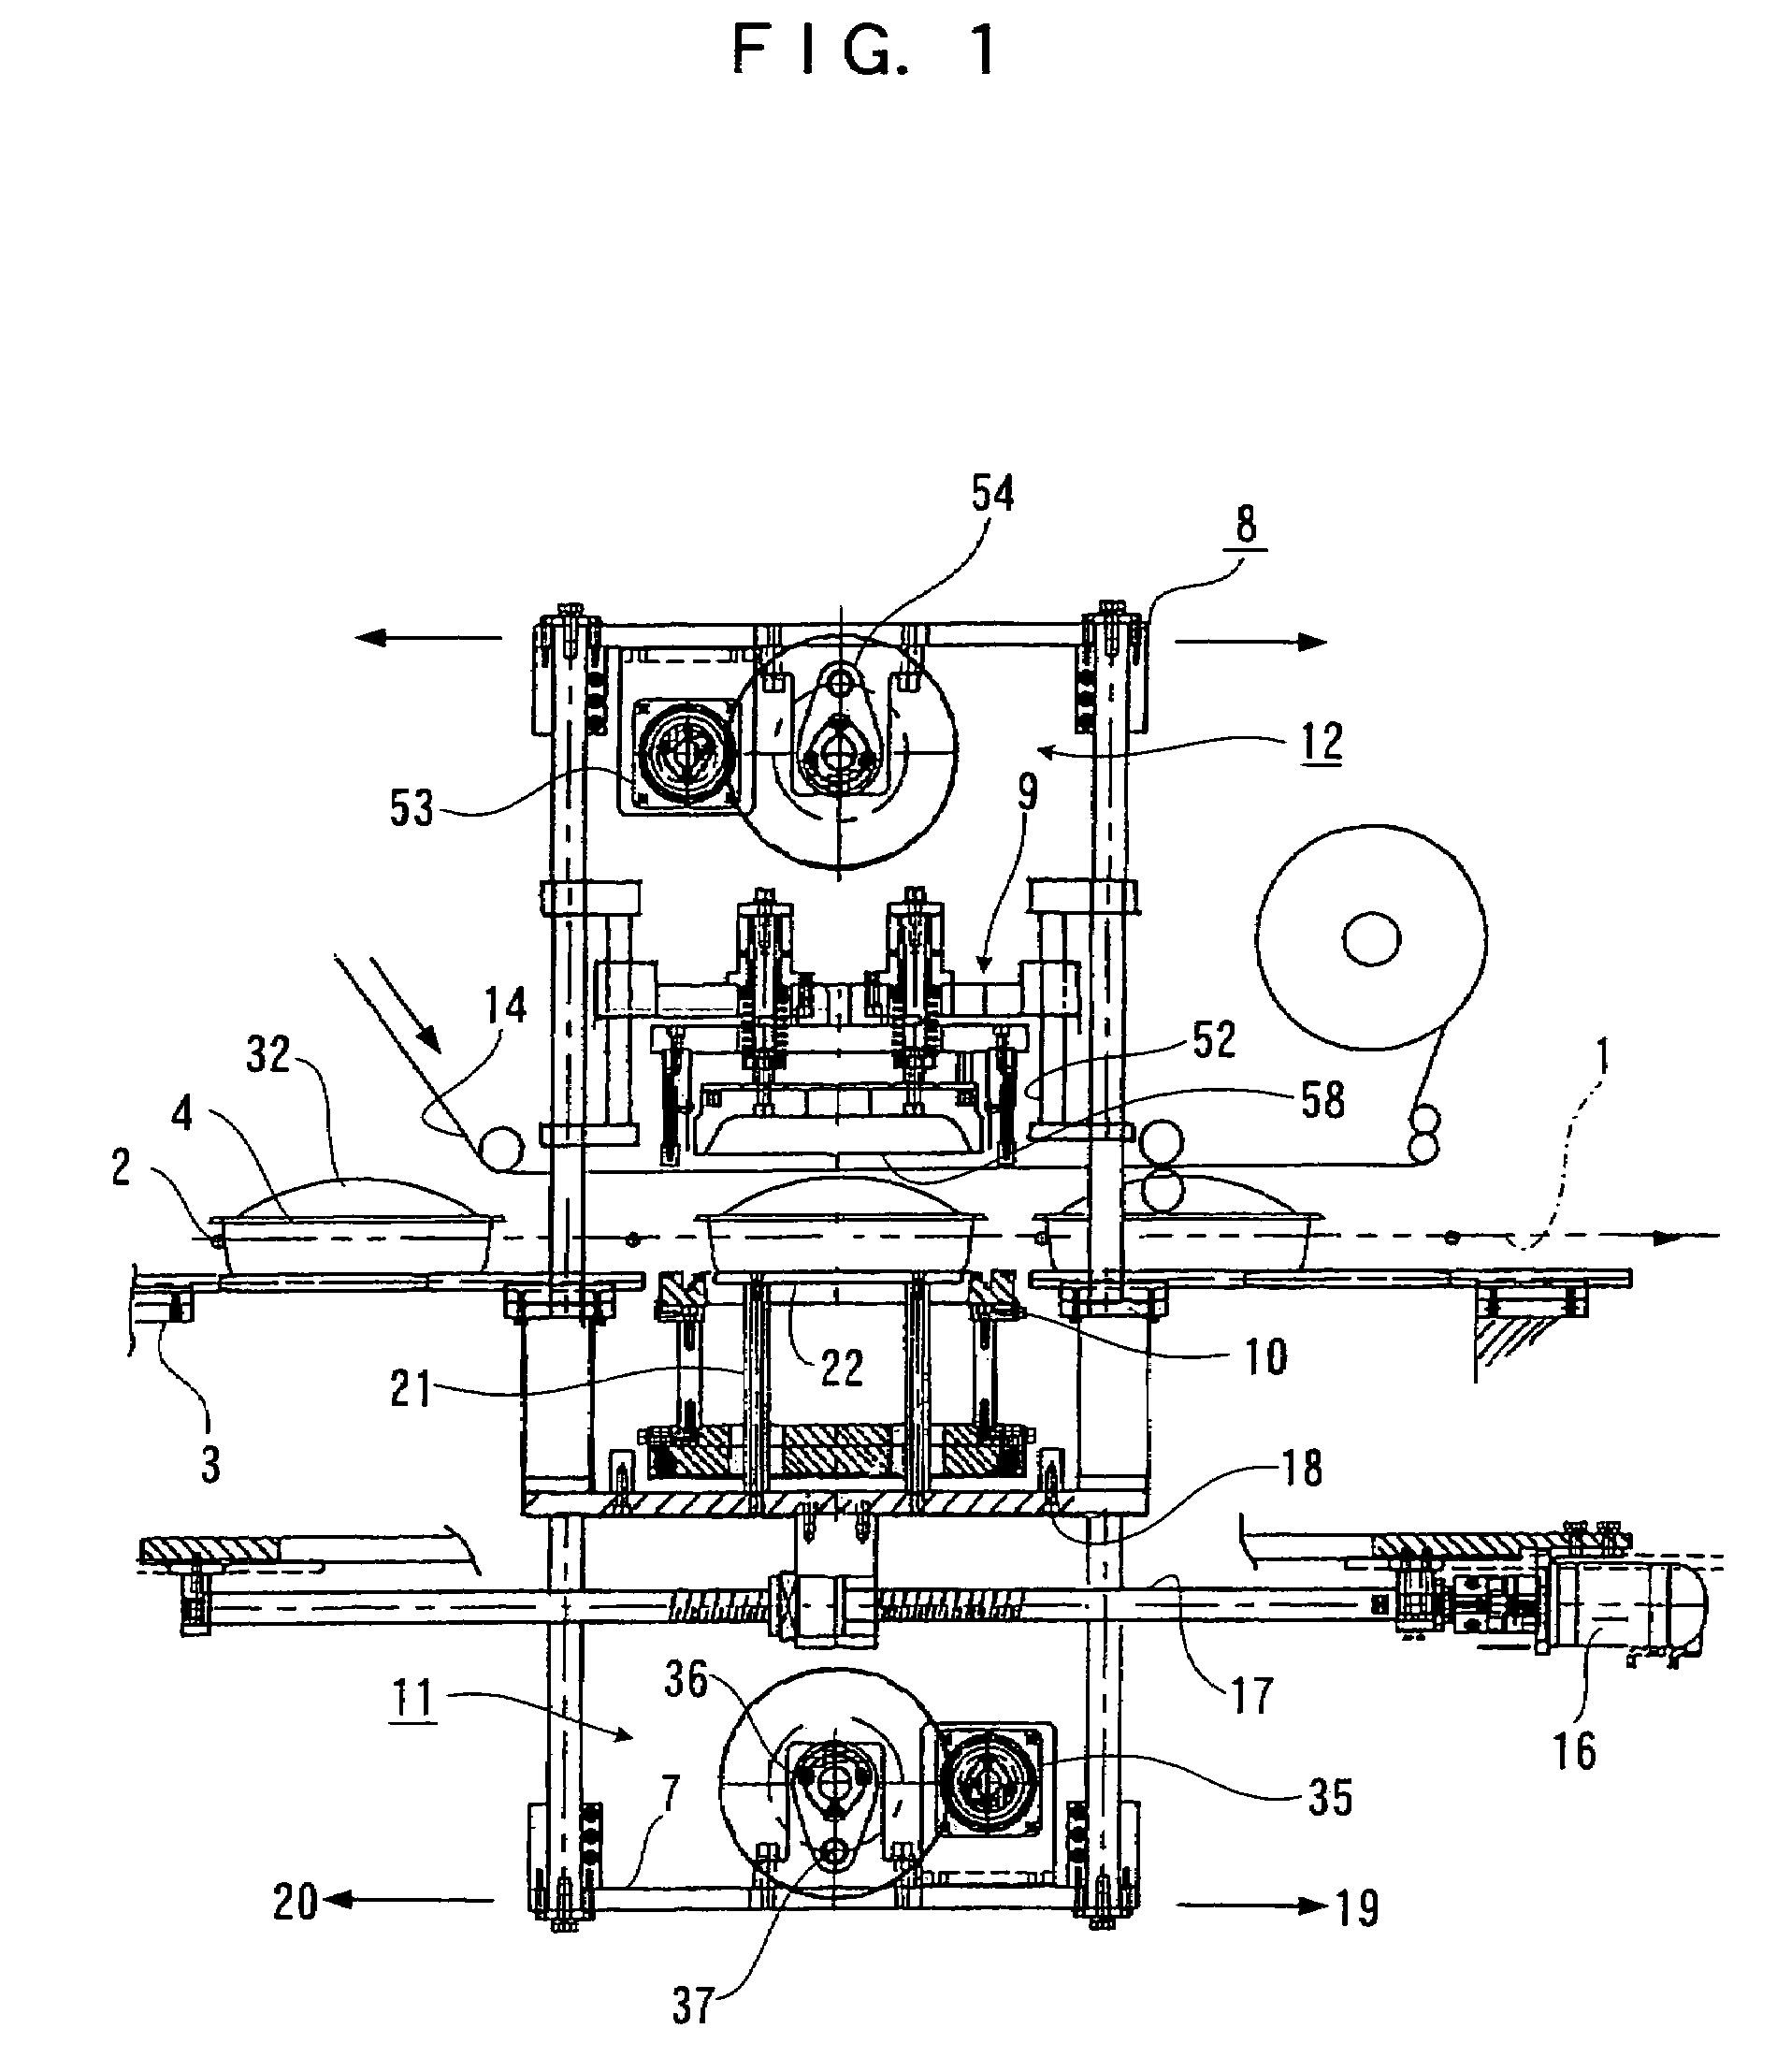 Packaging device for covering and sealing cover film onto tray